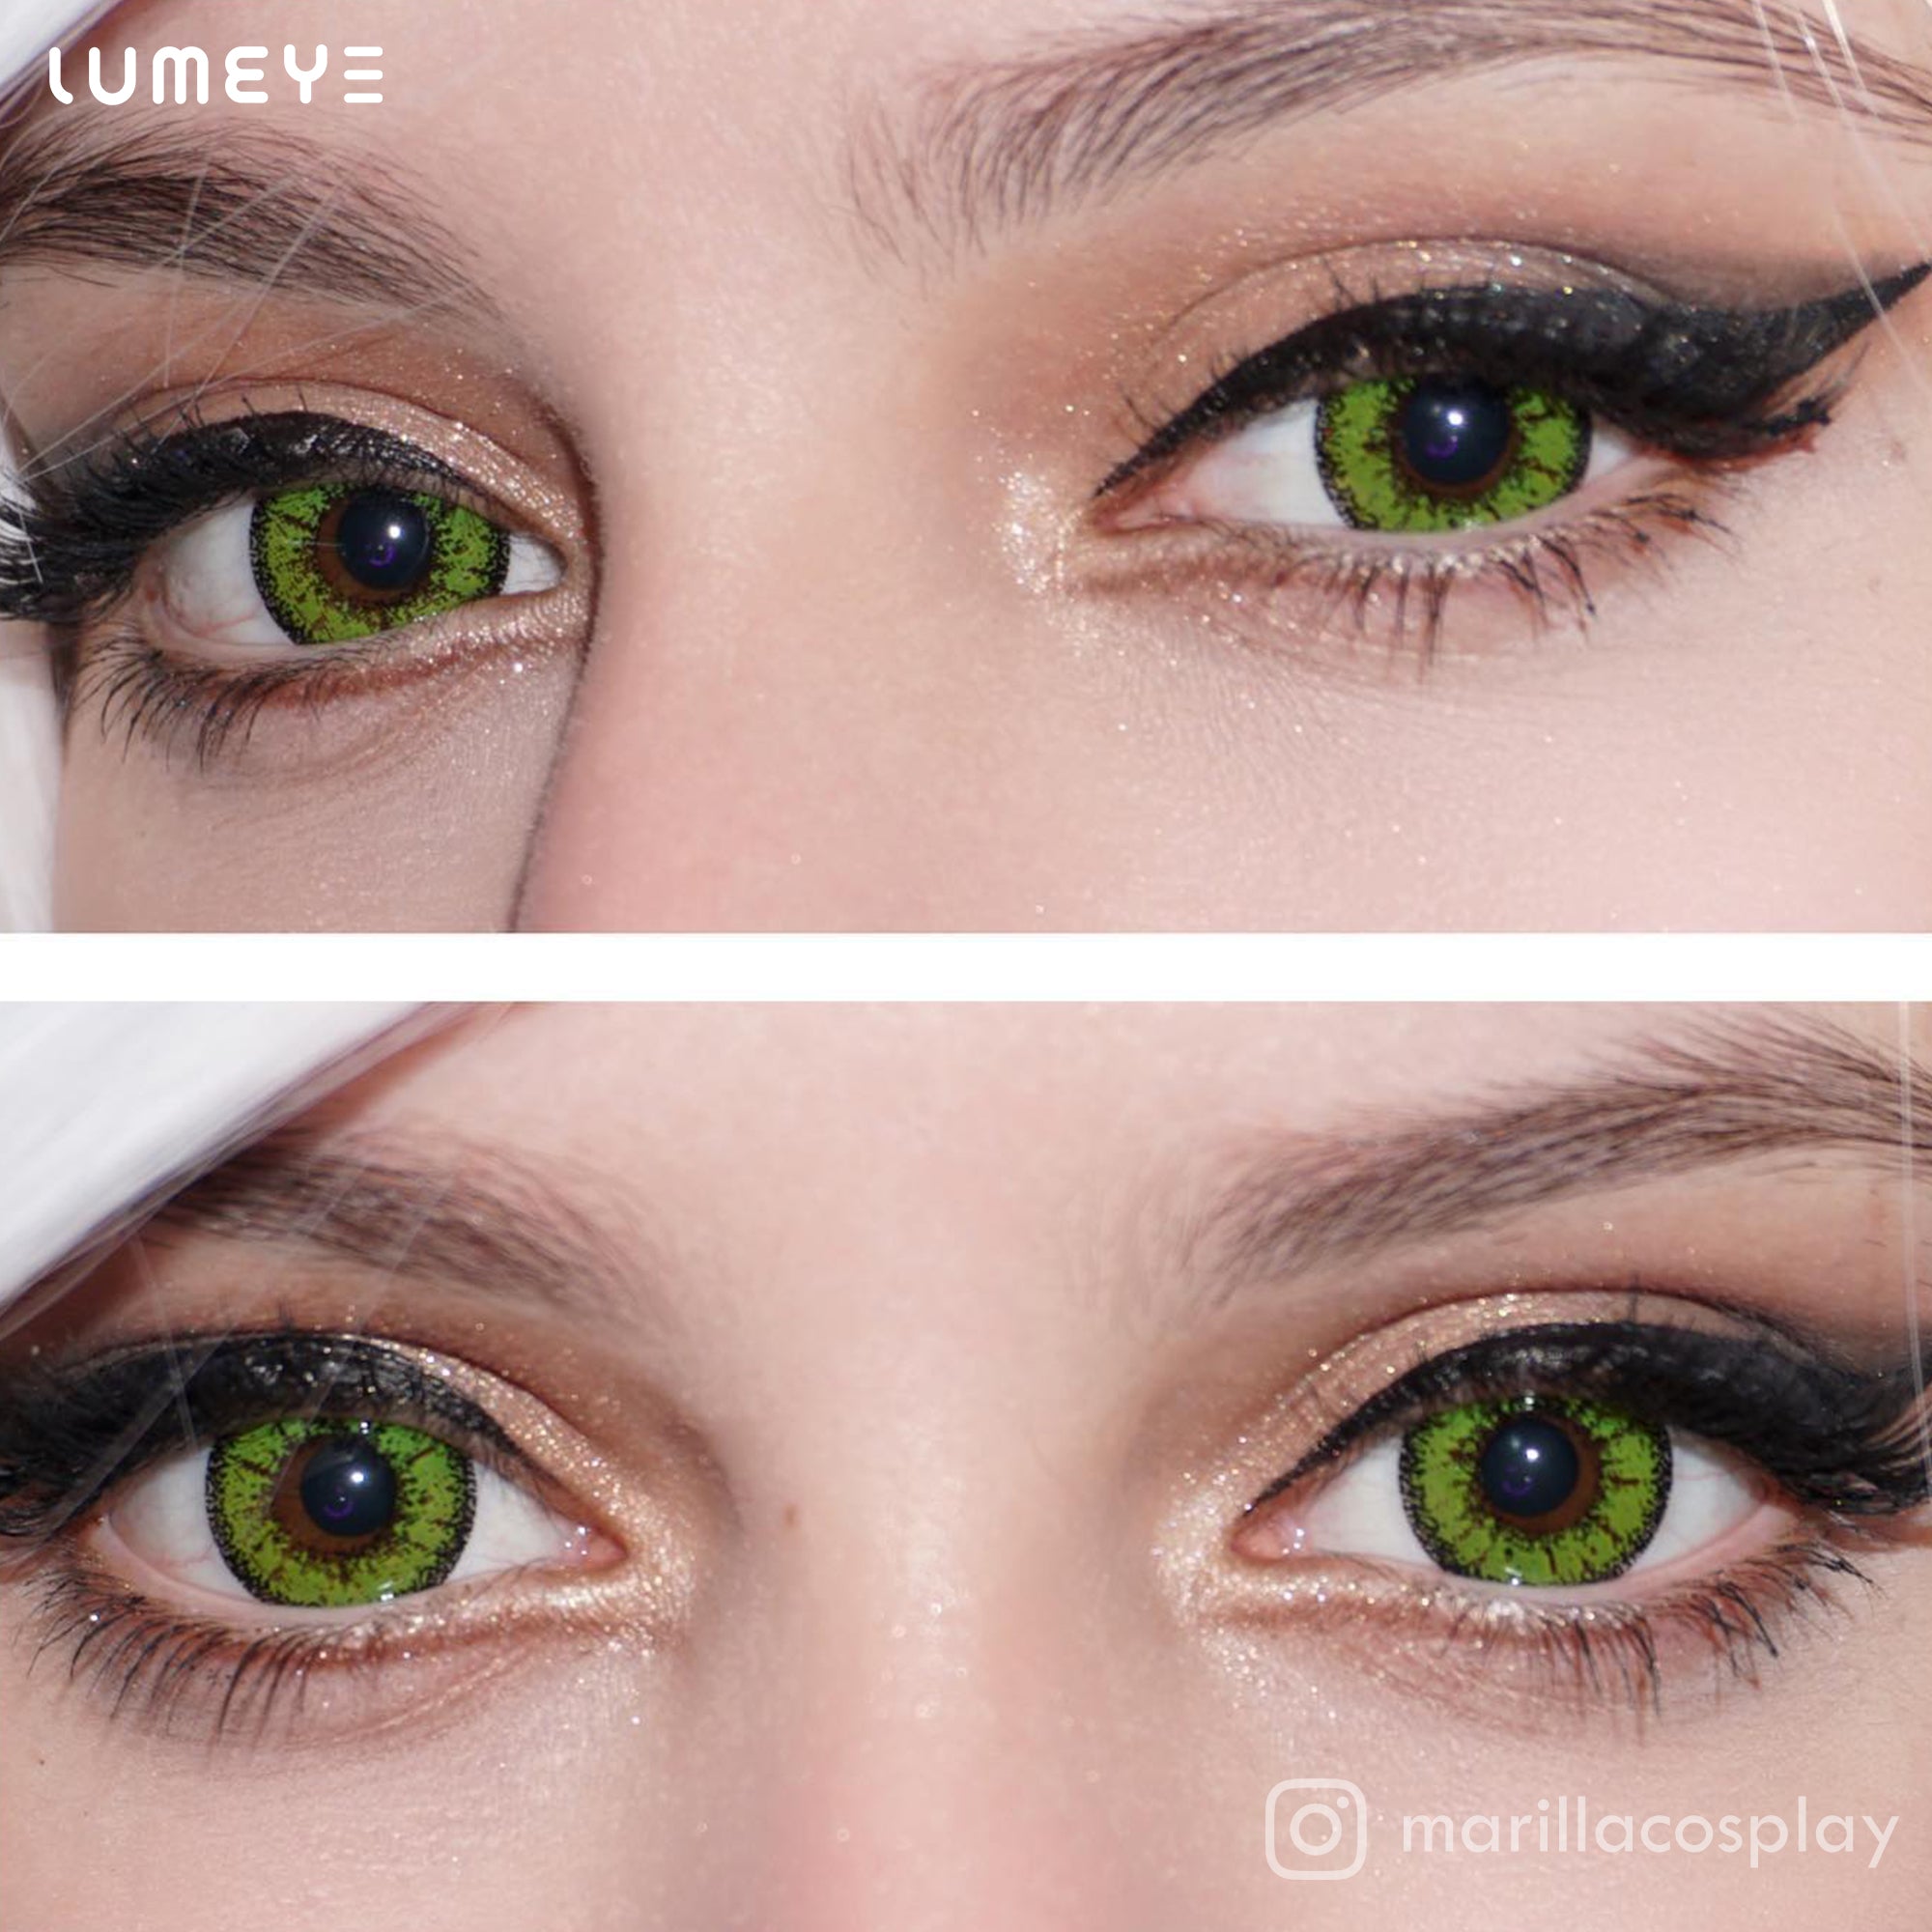 Best COLORED CONTACTS - Genshin Impact - LUMEYE Xiao Colored Contact Lenses - LUMEYE